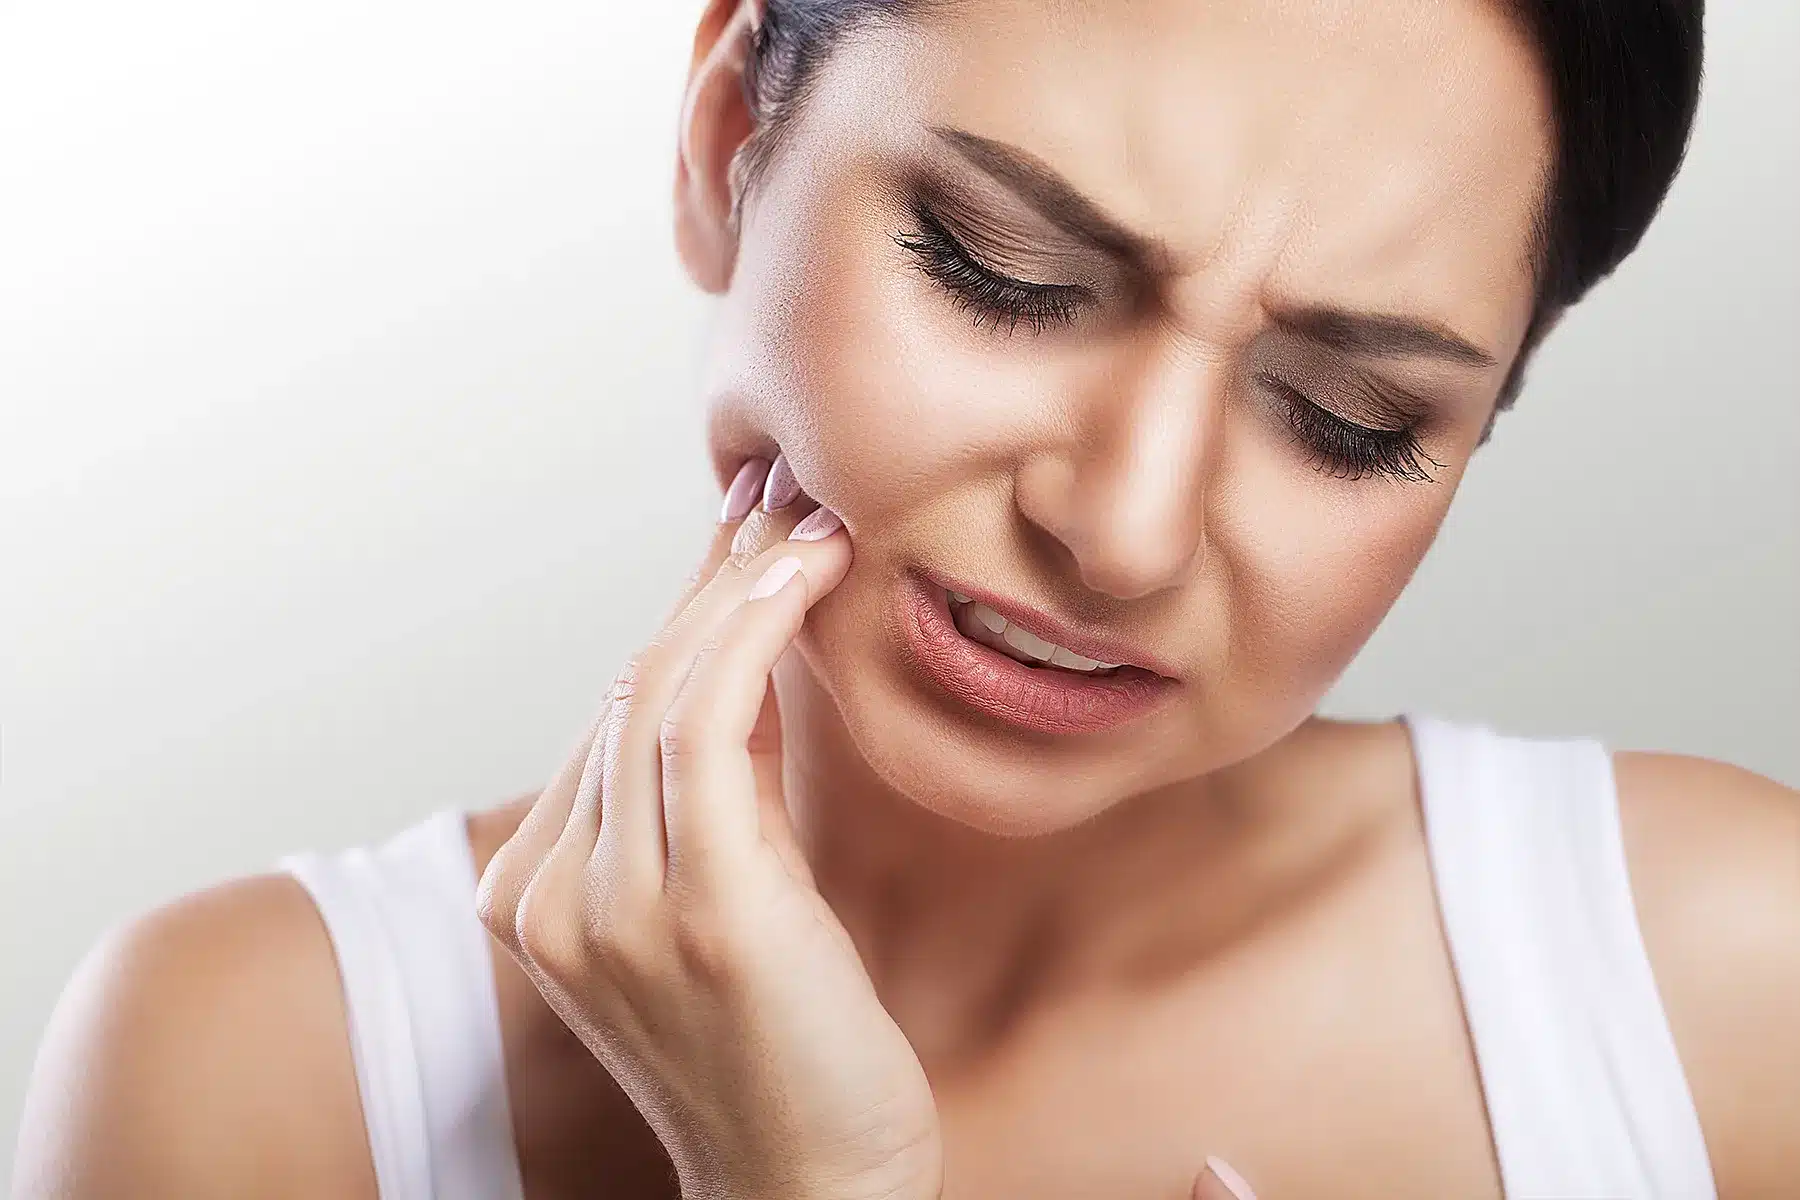 How 24 Hour Emergency Dentist Can Stop Dental Pain